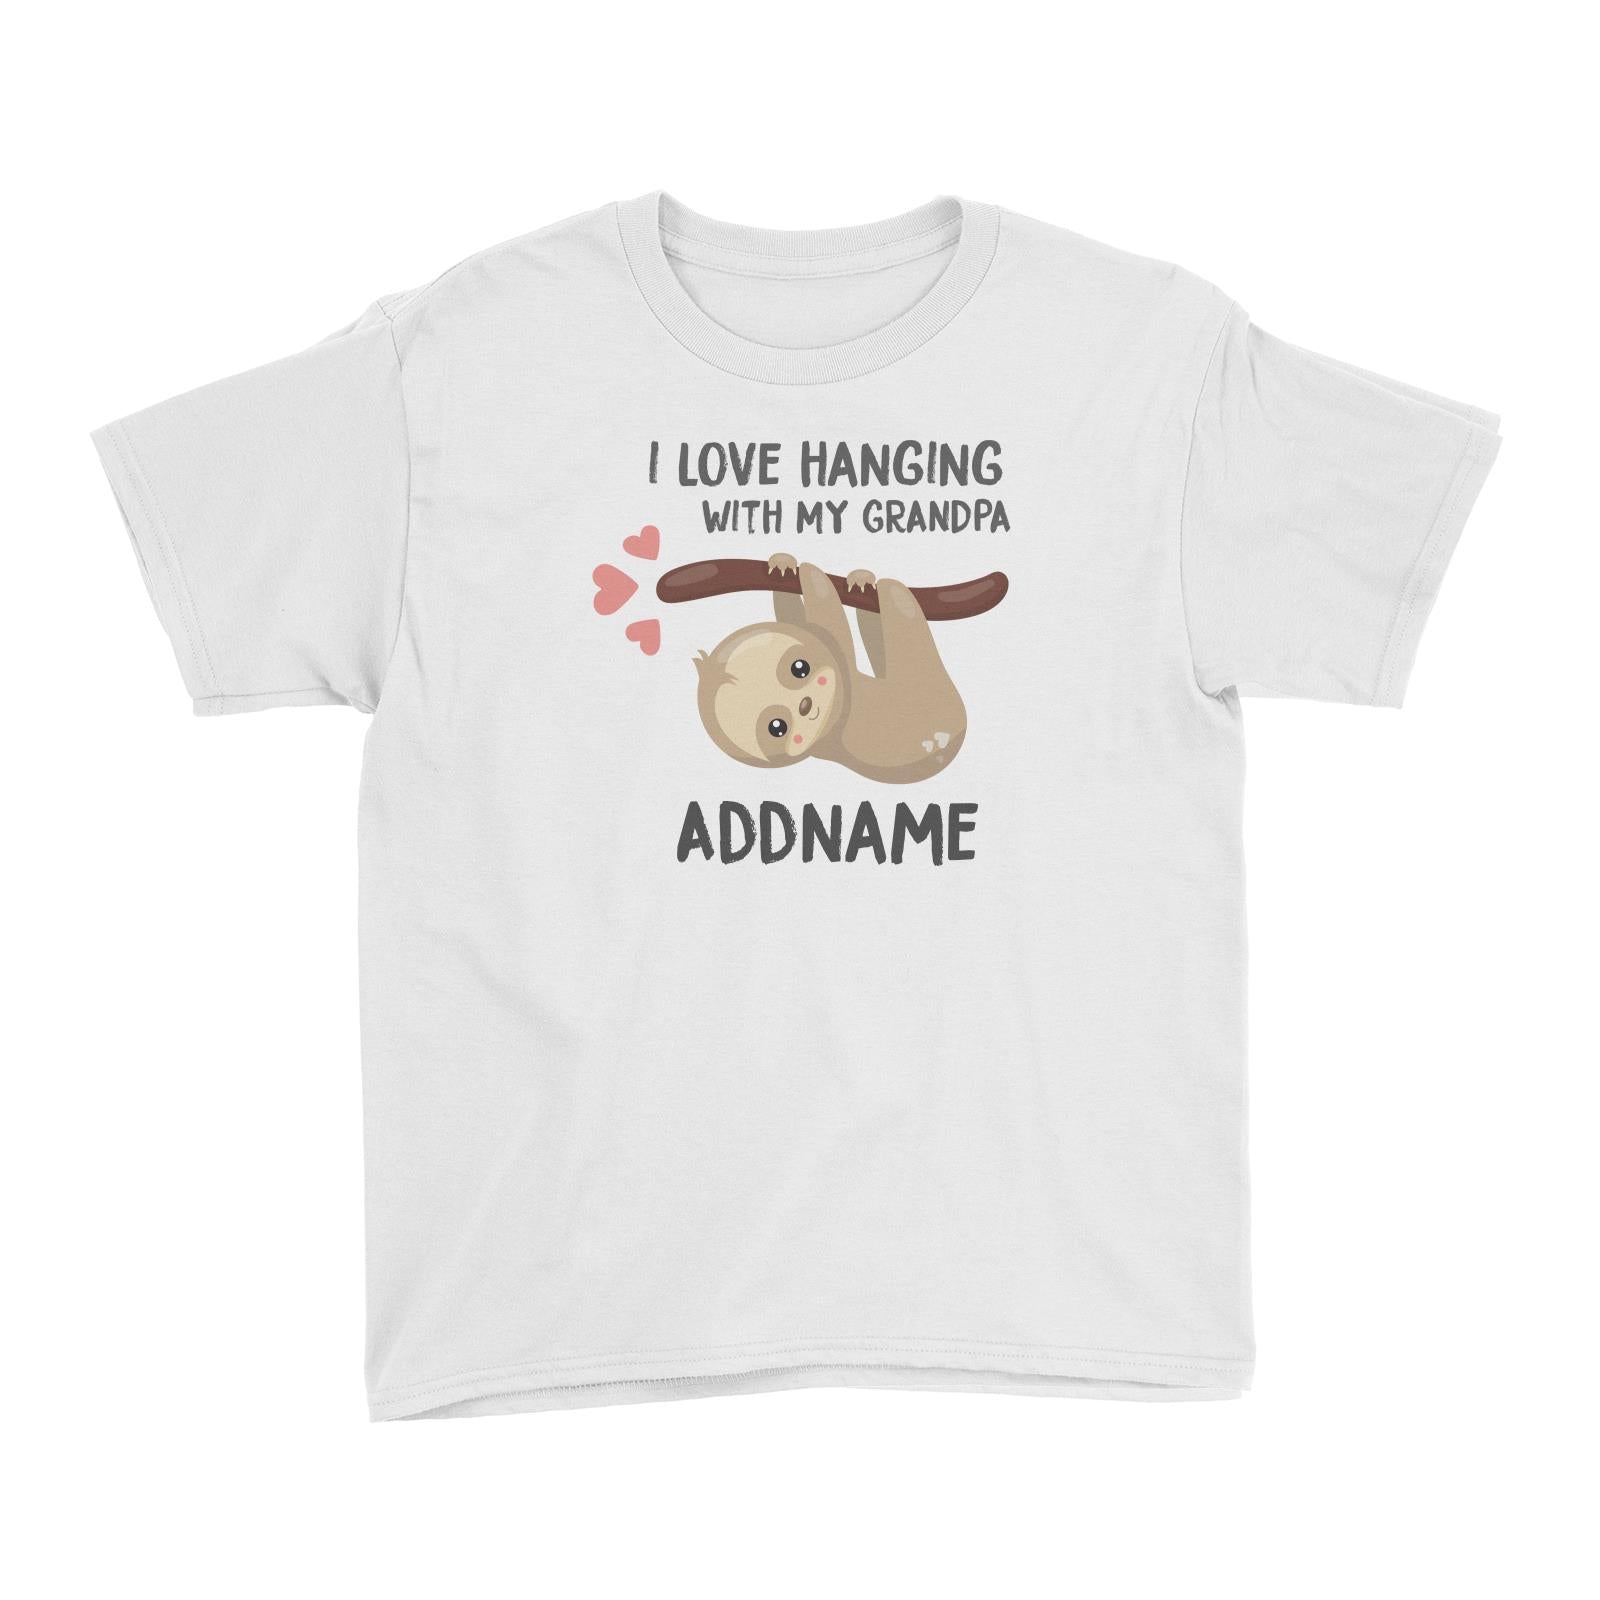 Cute Sloth I Love Hanging With My Grandpa Addname Kid's T-Shirt